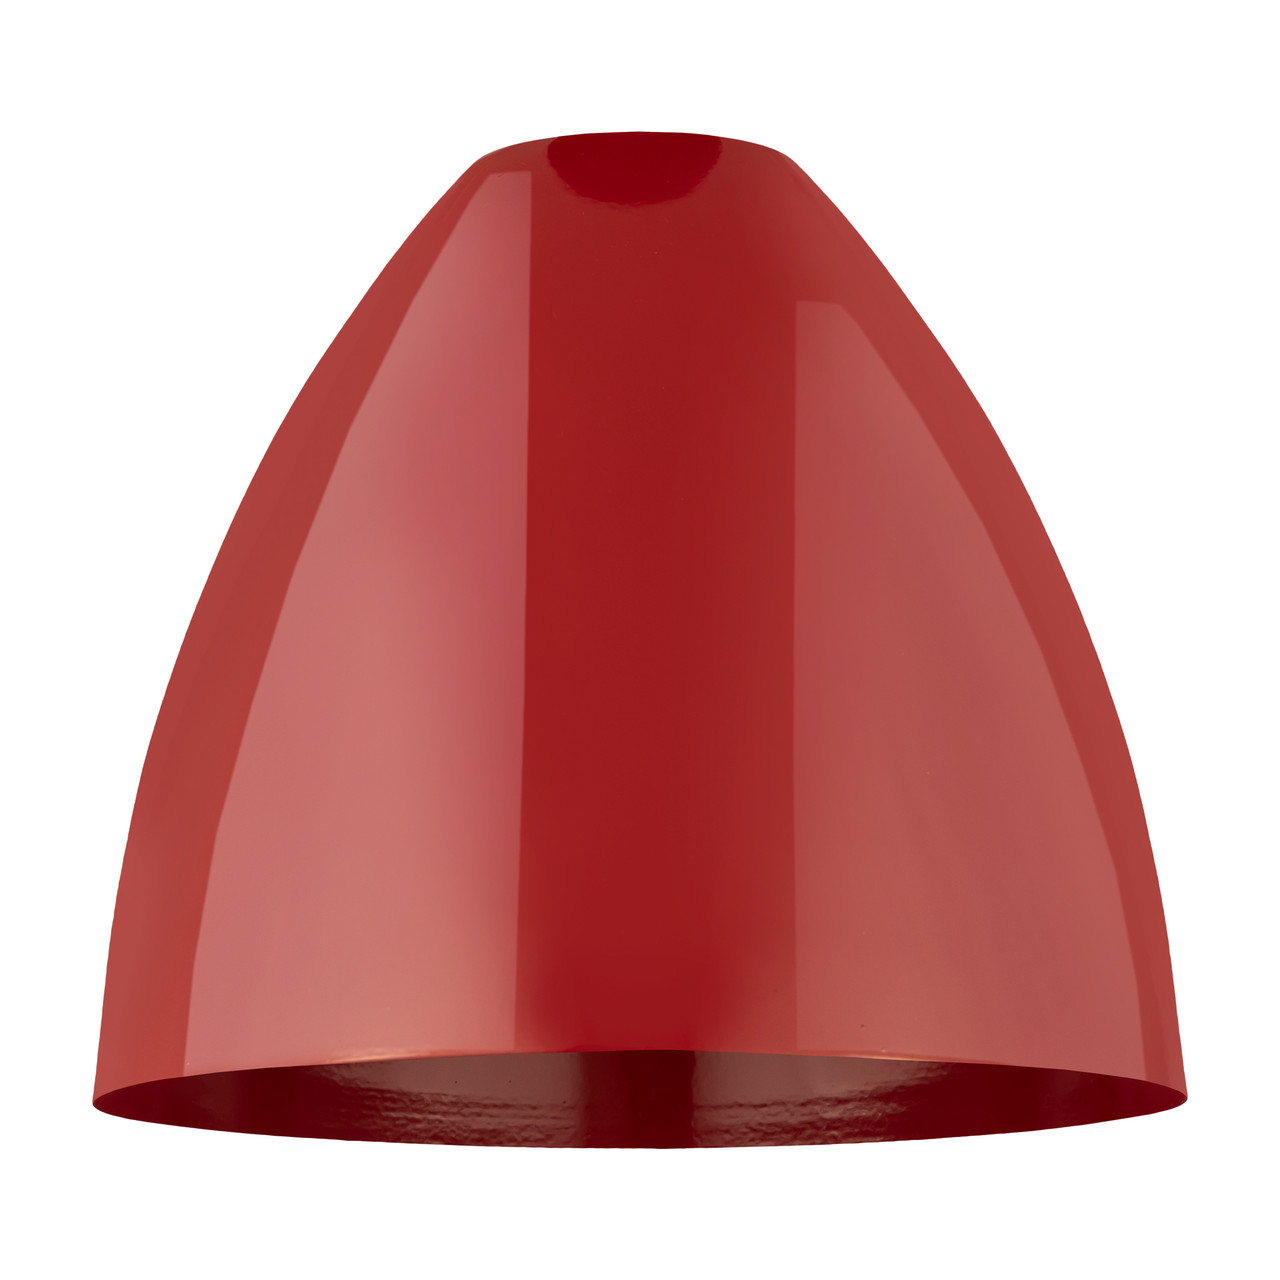 INNOVATIONS MBD-12-RD Plymouth Dome Light 12 inch Red Metal Shade